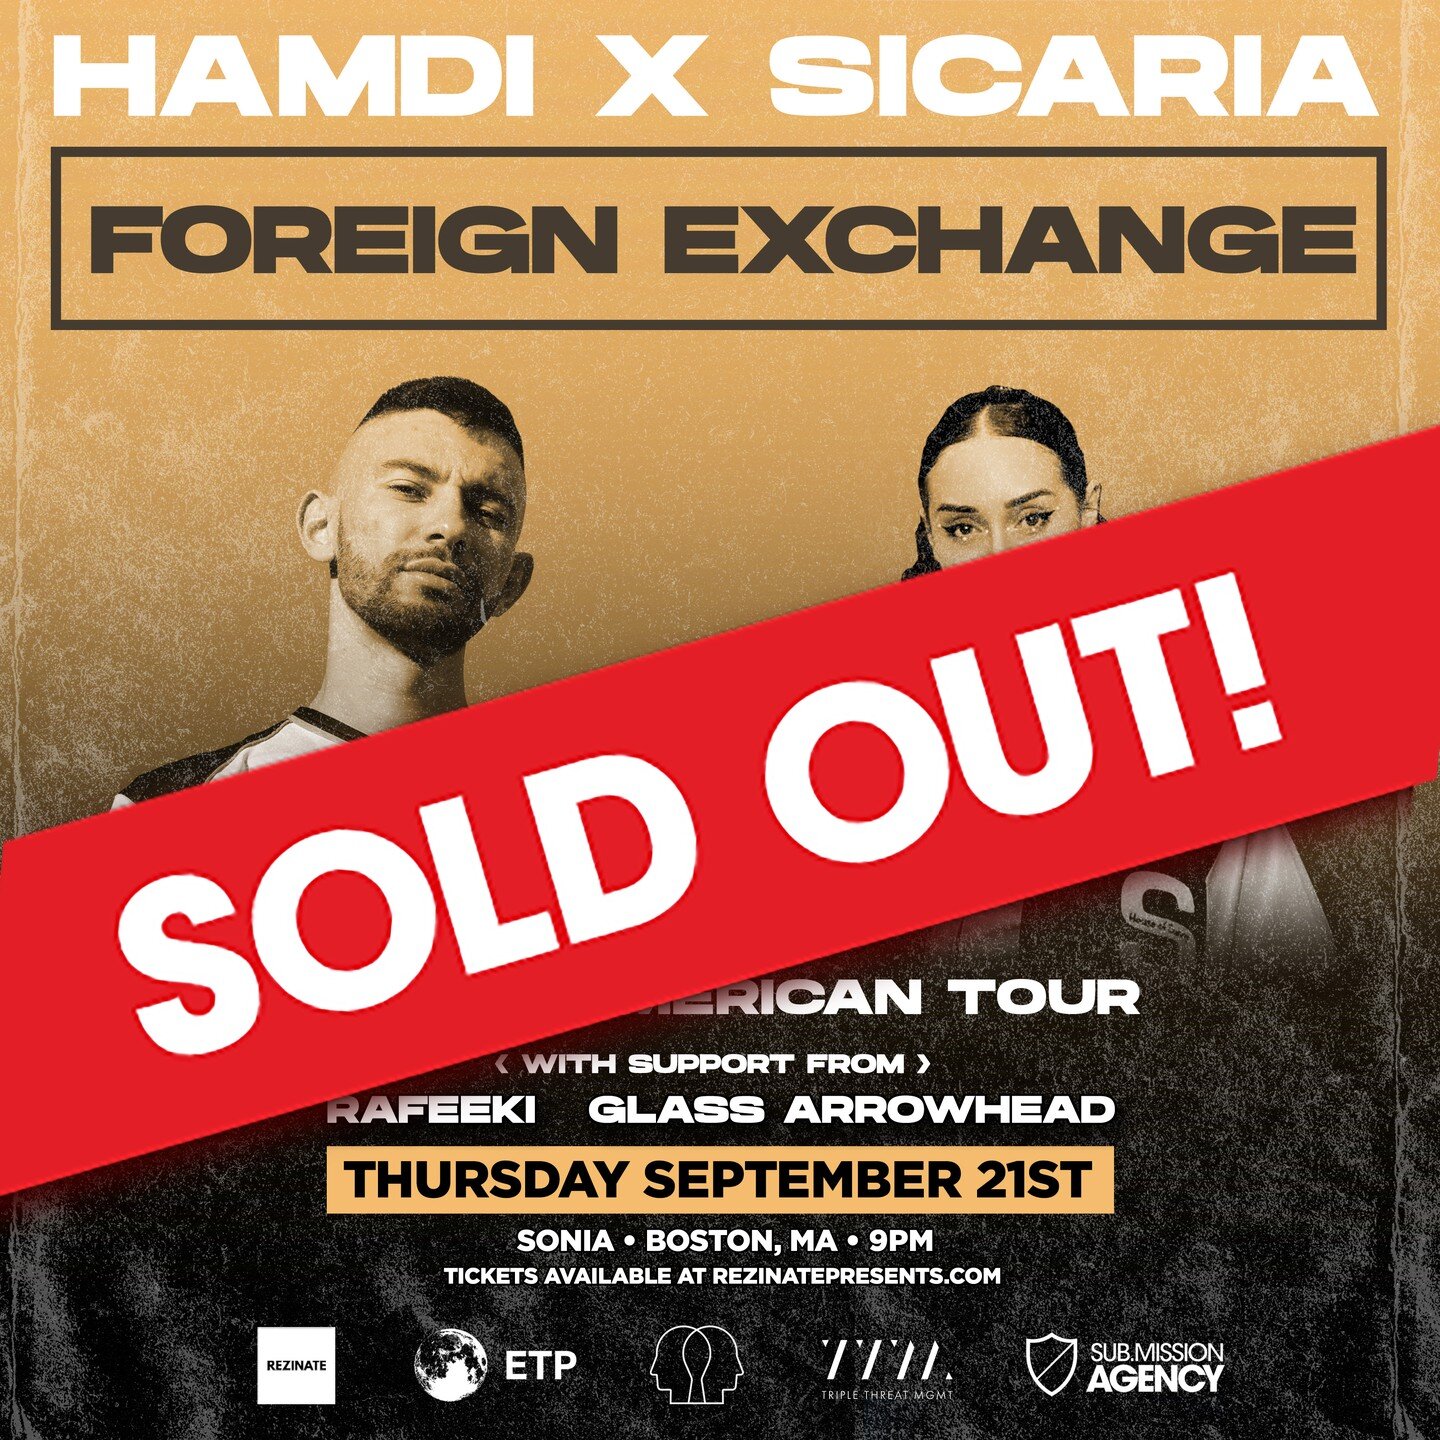 We just put 10 more tickets online available for sale. These are the very last tickets available. Venmo list is now closed. There will be no tickets available at the door! 

@hamdimusic 
@sicariaonline 
@rafeeki_music 
@glass_arrowhead 
@soniamideast